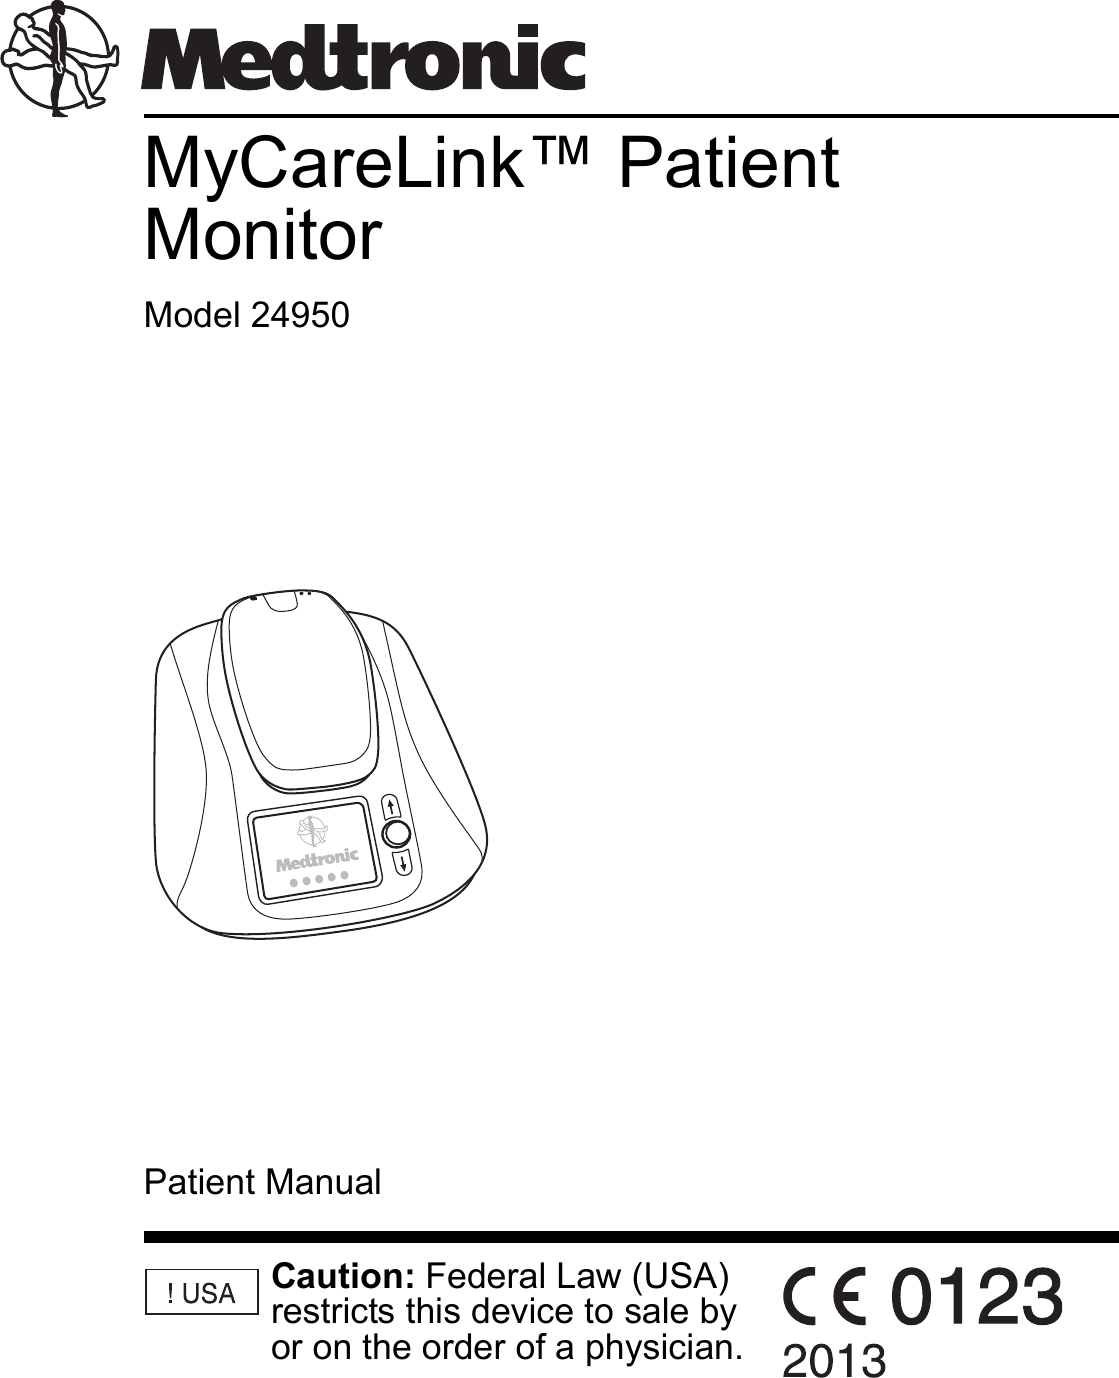 MyCareLink™ Patient MonitorModel 24950Caution: Federal Law (USA) restricts this device to sale by or on the order of a physician.Patient Manual